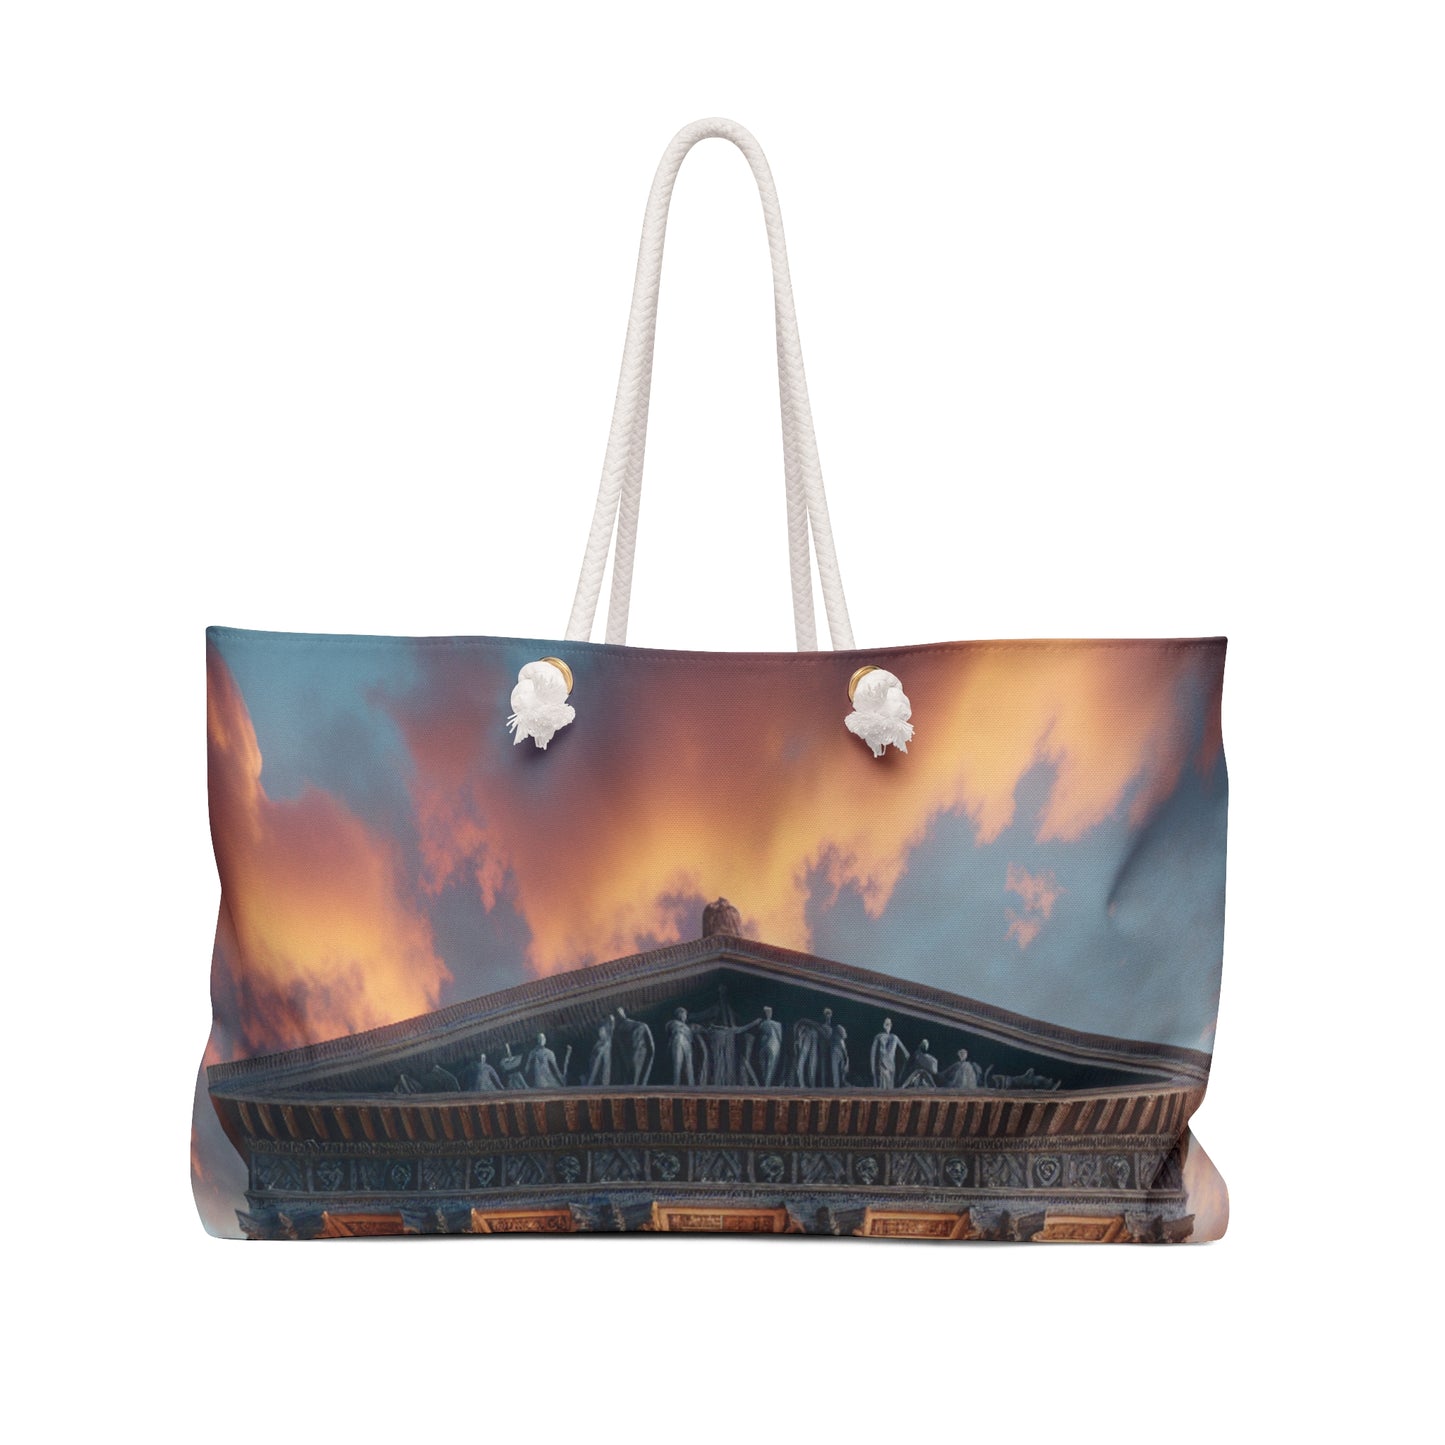 "Warm Glow of the Grecian Temple" - The Alien Weekender Bag Neoclassicism Style